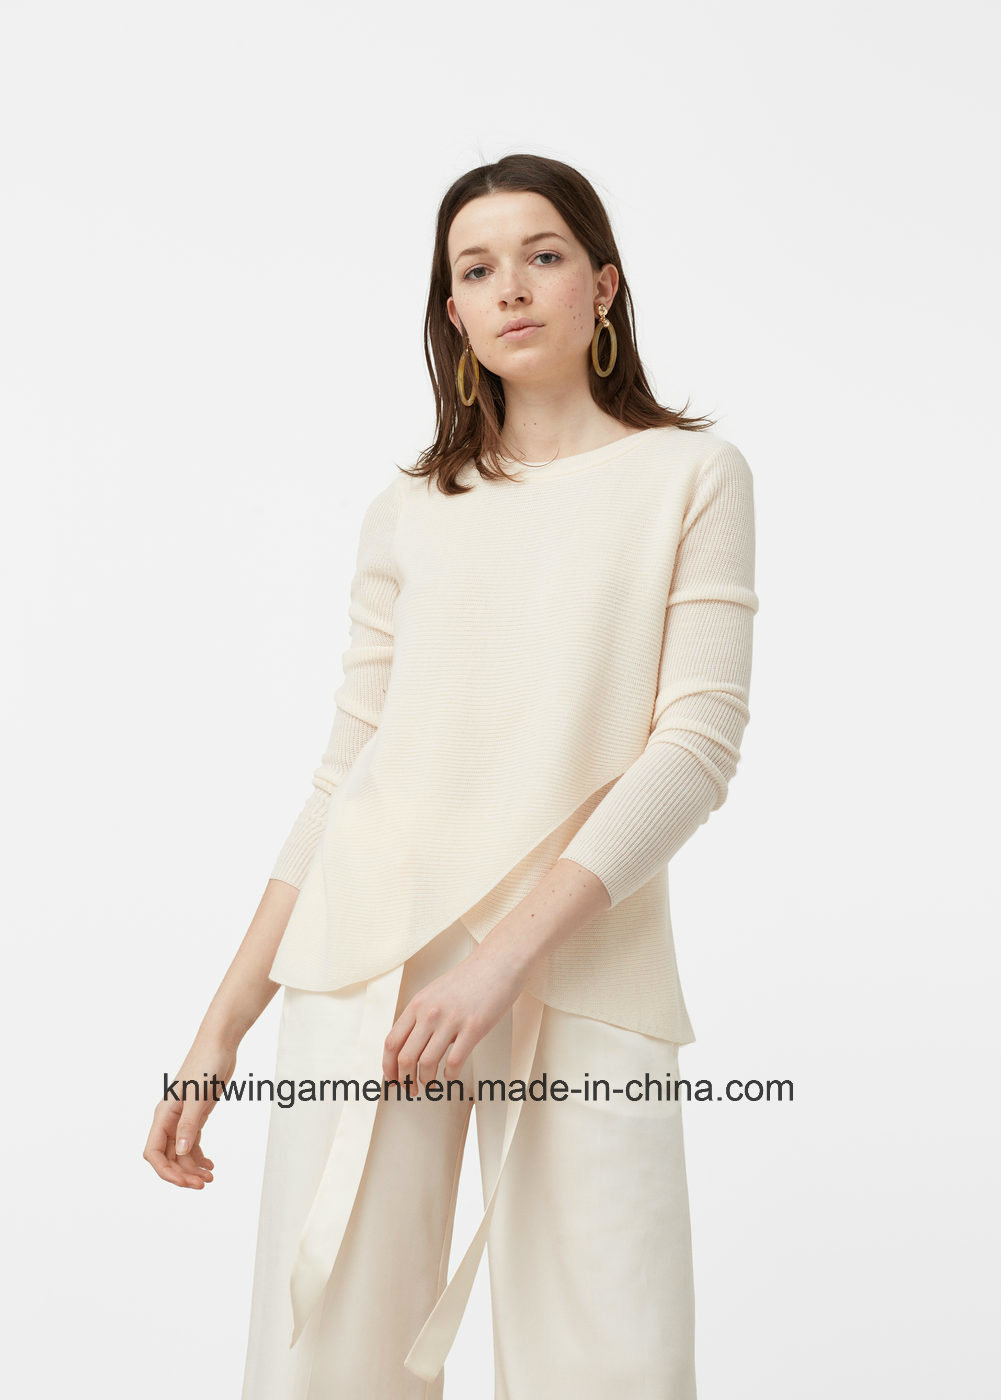 OEM Women Fashion Round Neck Long Sleeve Sweater Clothes (W17-786)